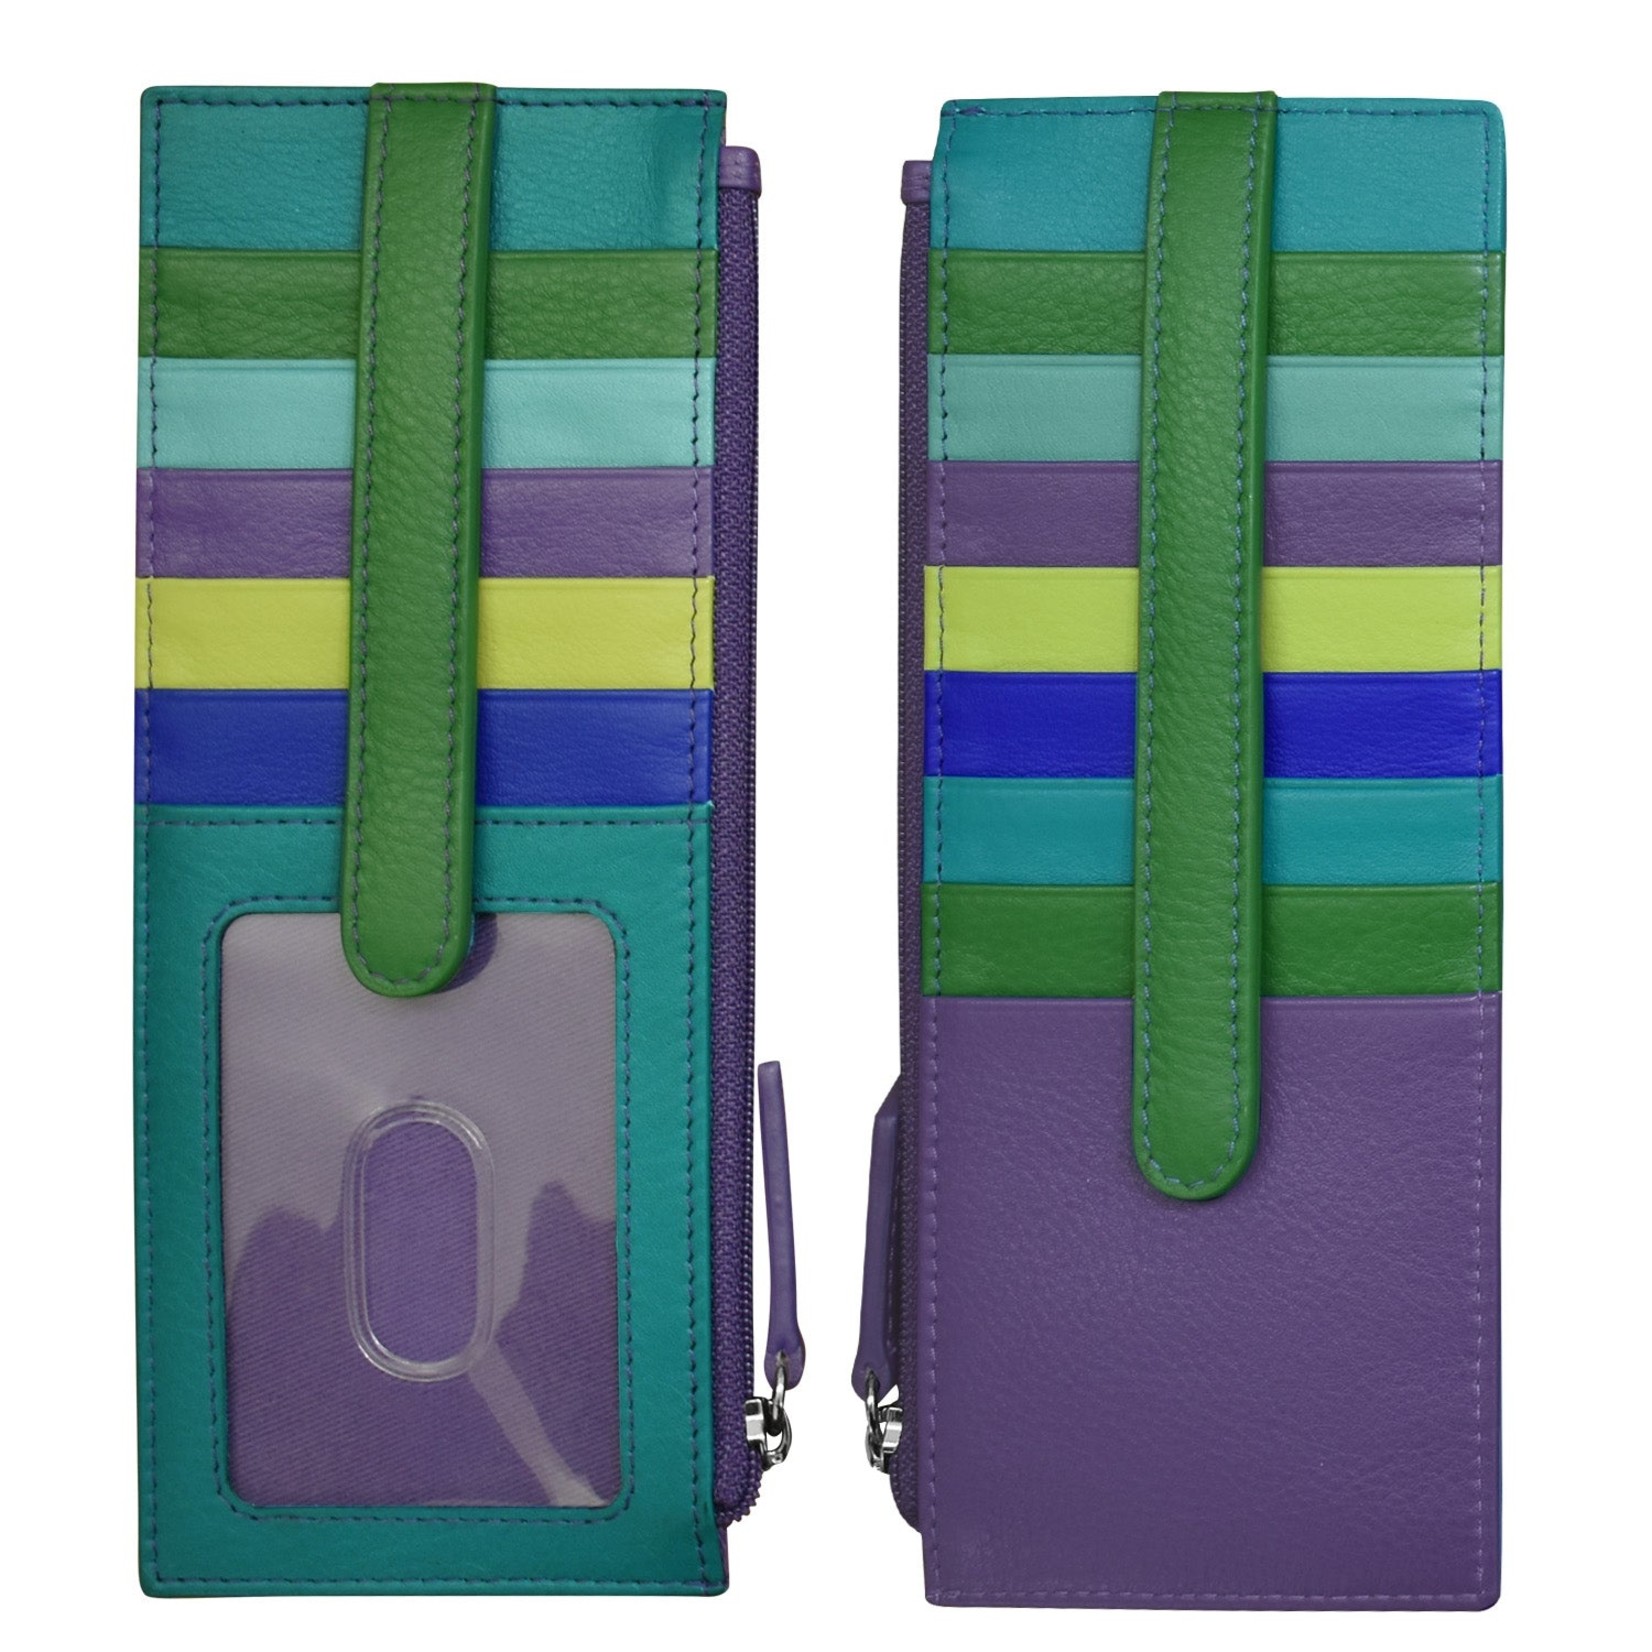 Leather Handbags and Accessories 7800 Cool Tropics - RFID Card Holder